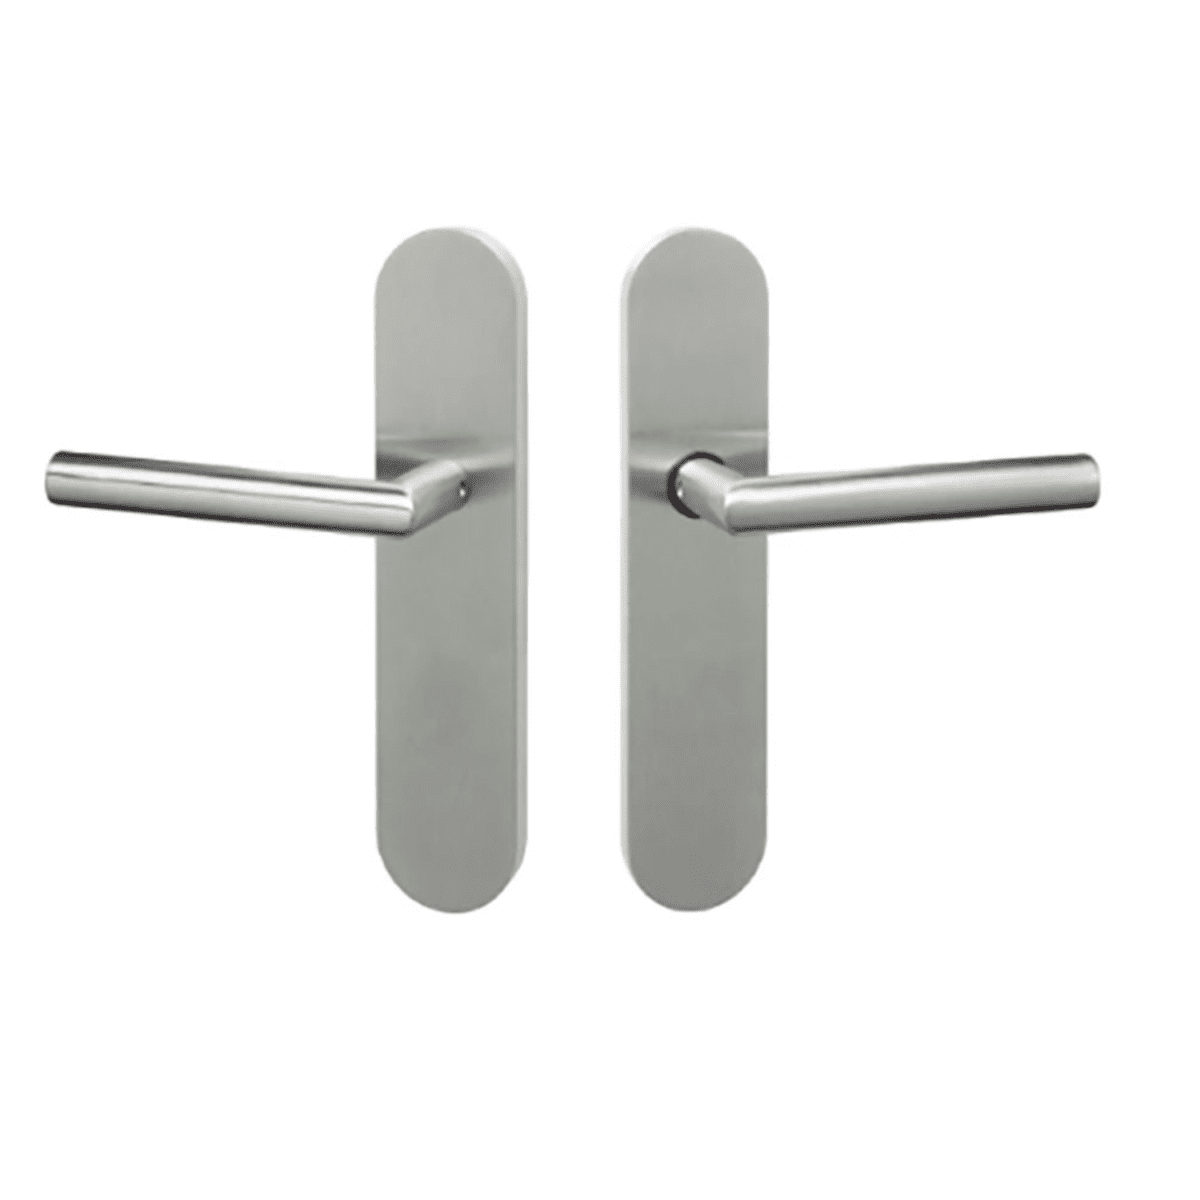 Hafi Security fitting H547 - Model 203 handle/stool on blind shield